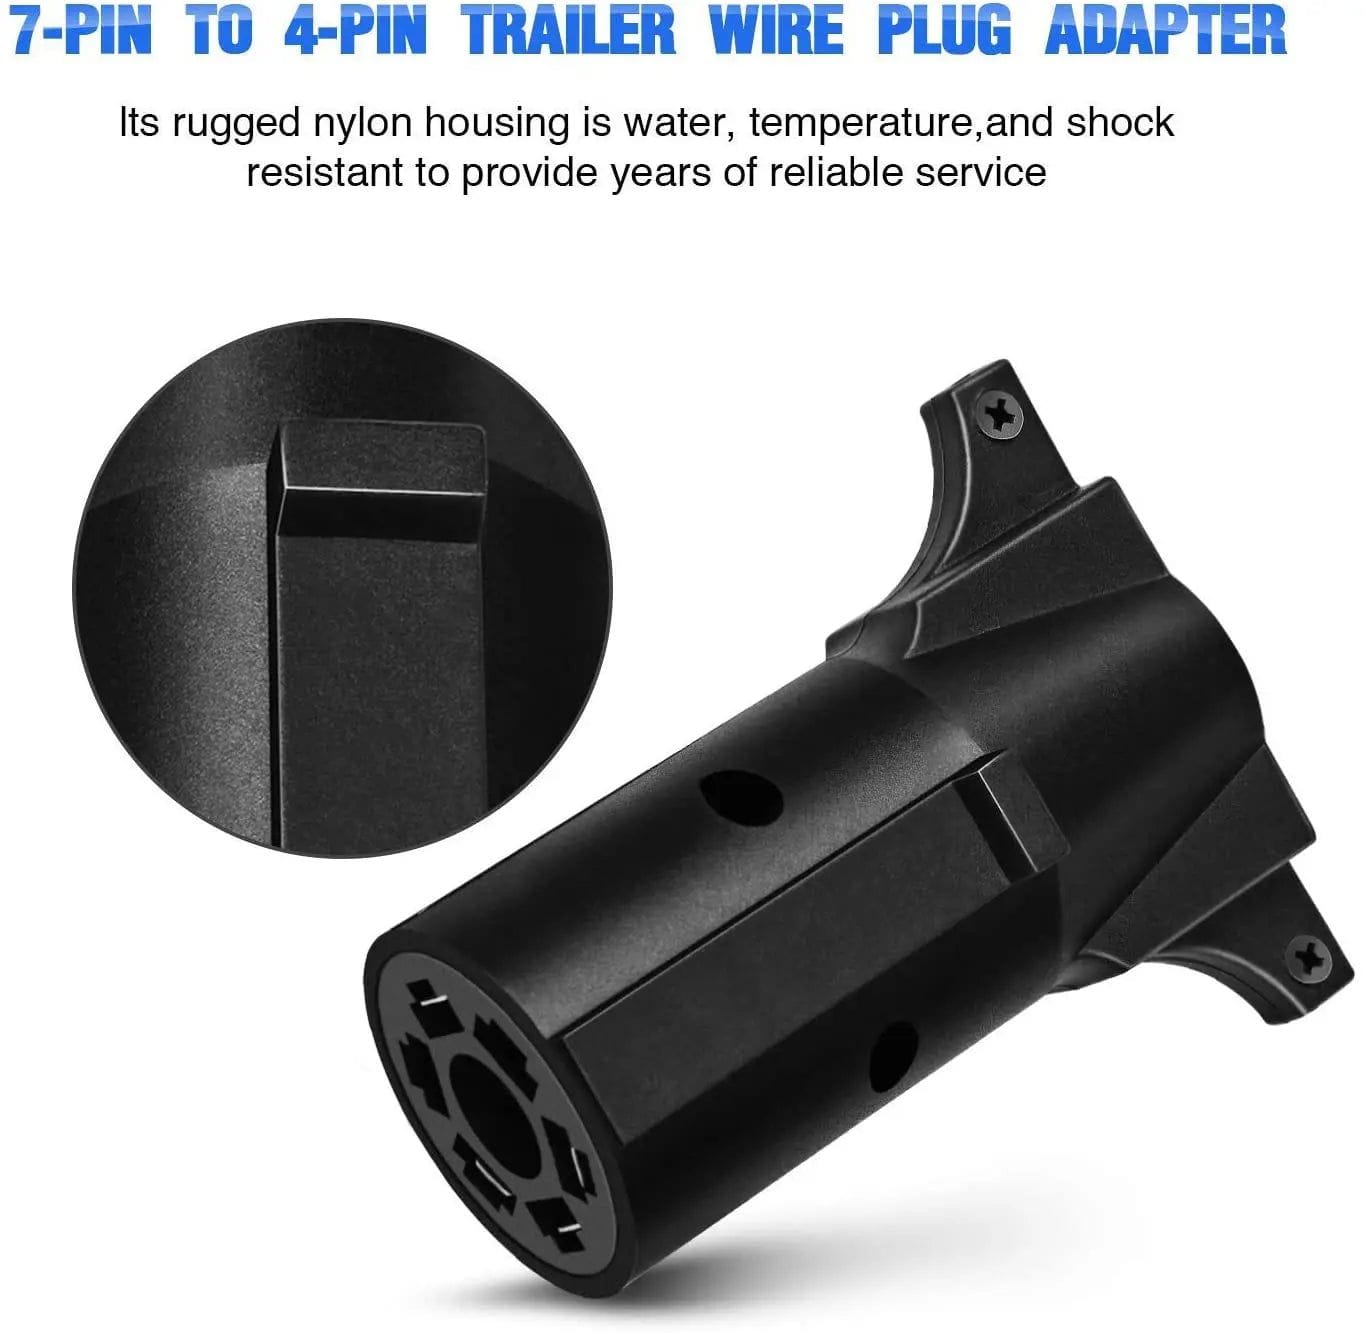 Accessories 7 Pin to 4 Pin Trailer Adapter Plug